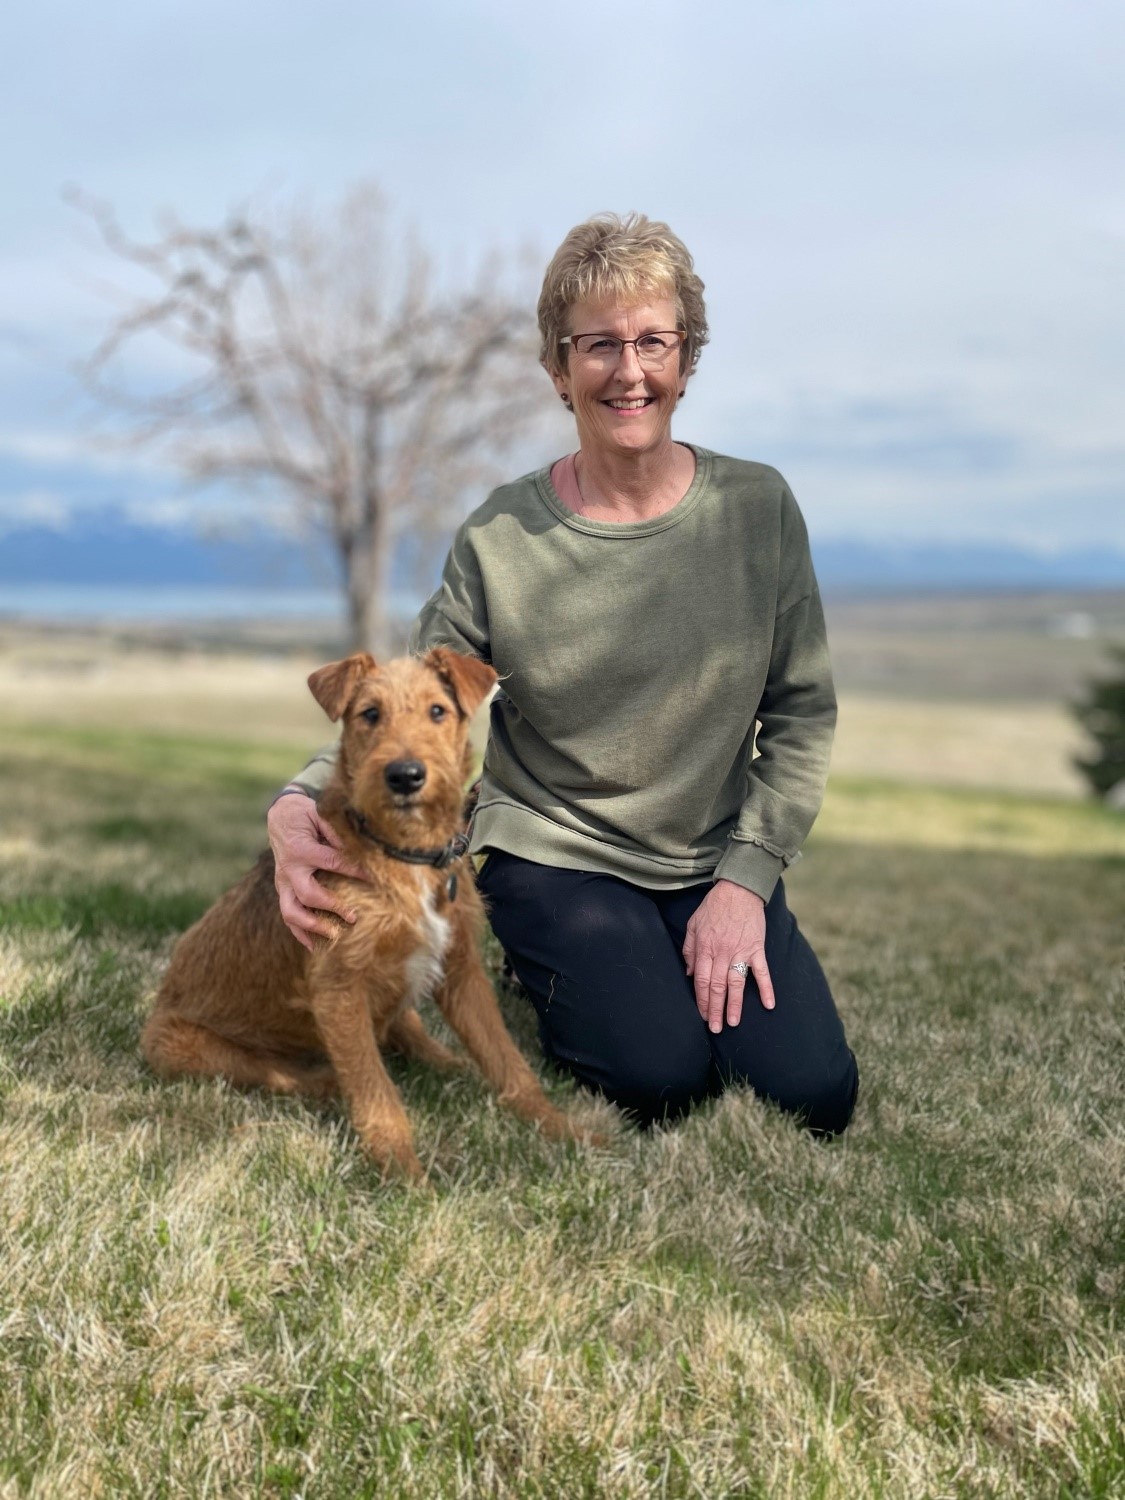 Teresa Morigeau sitting in a field with her arm around her dog.